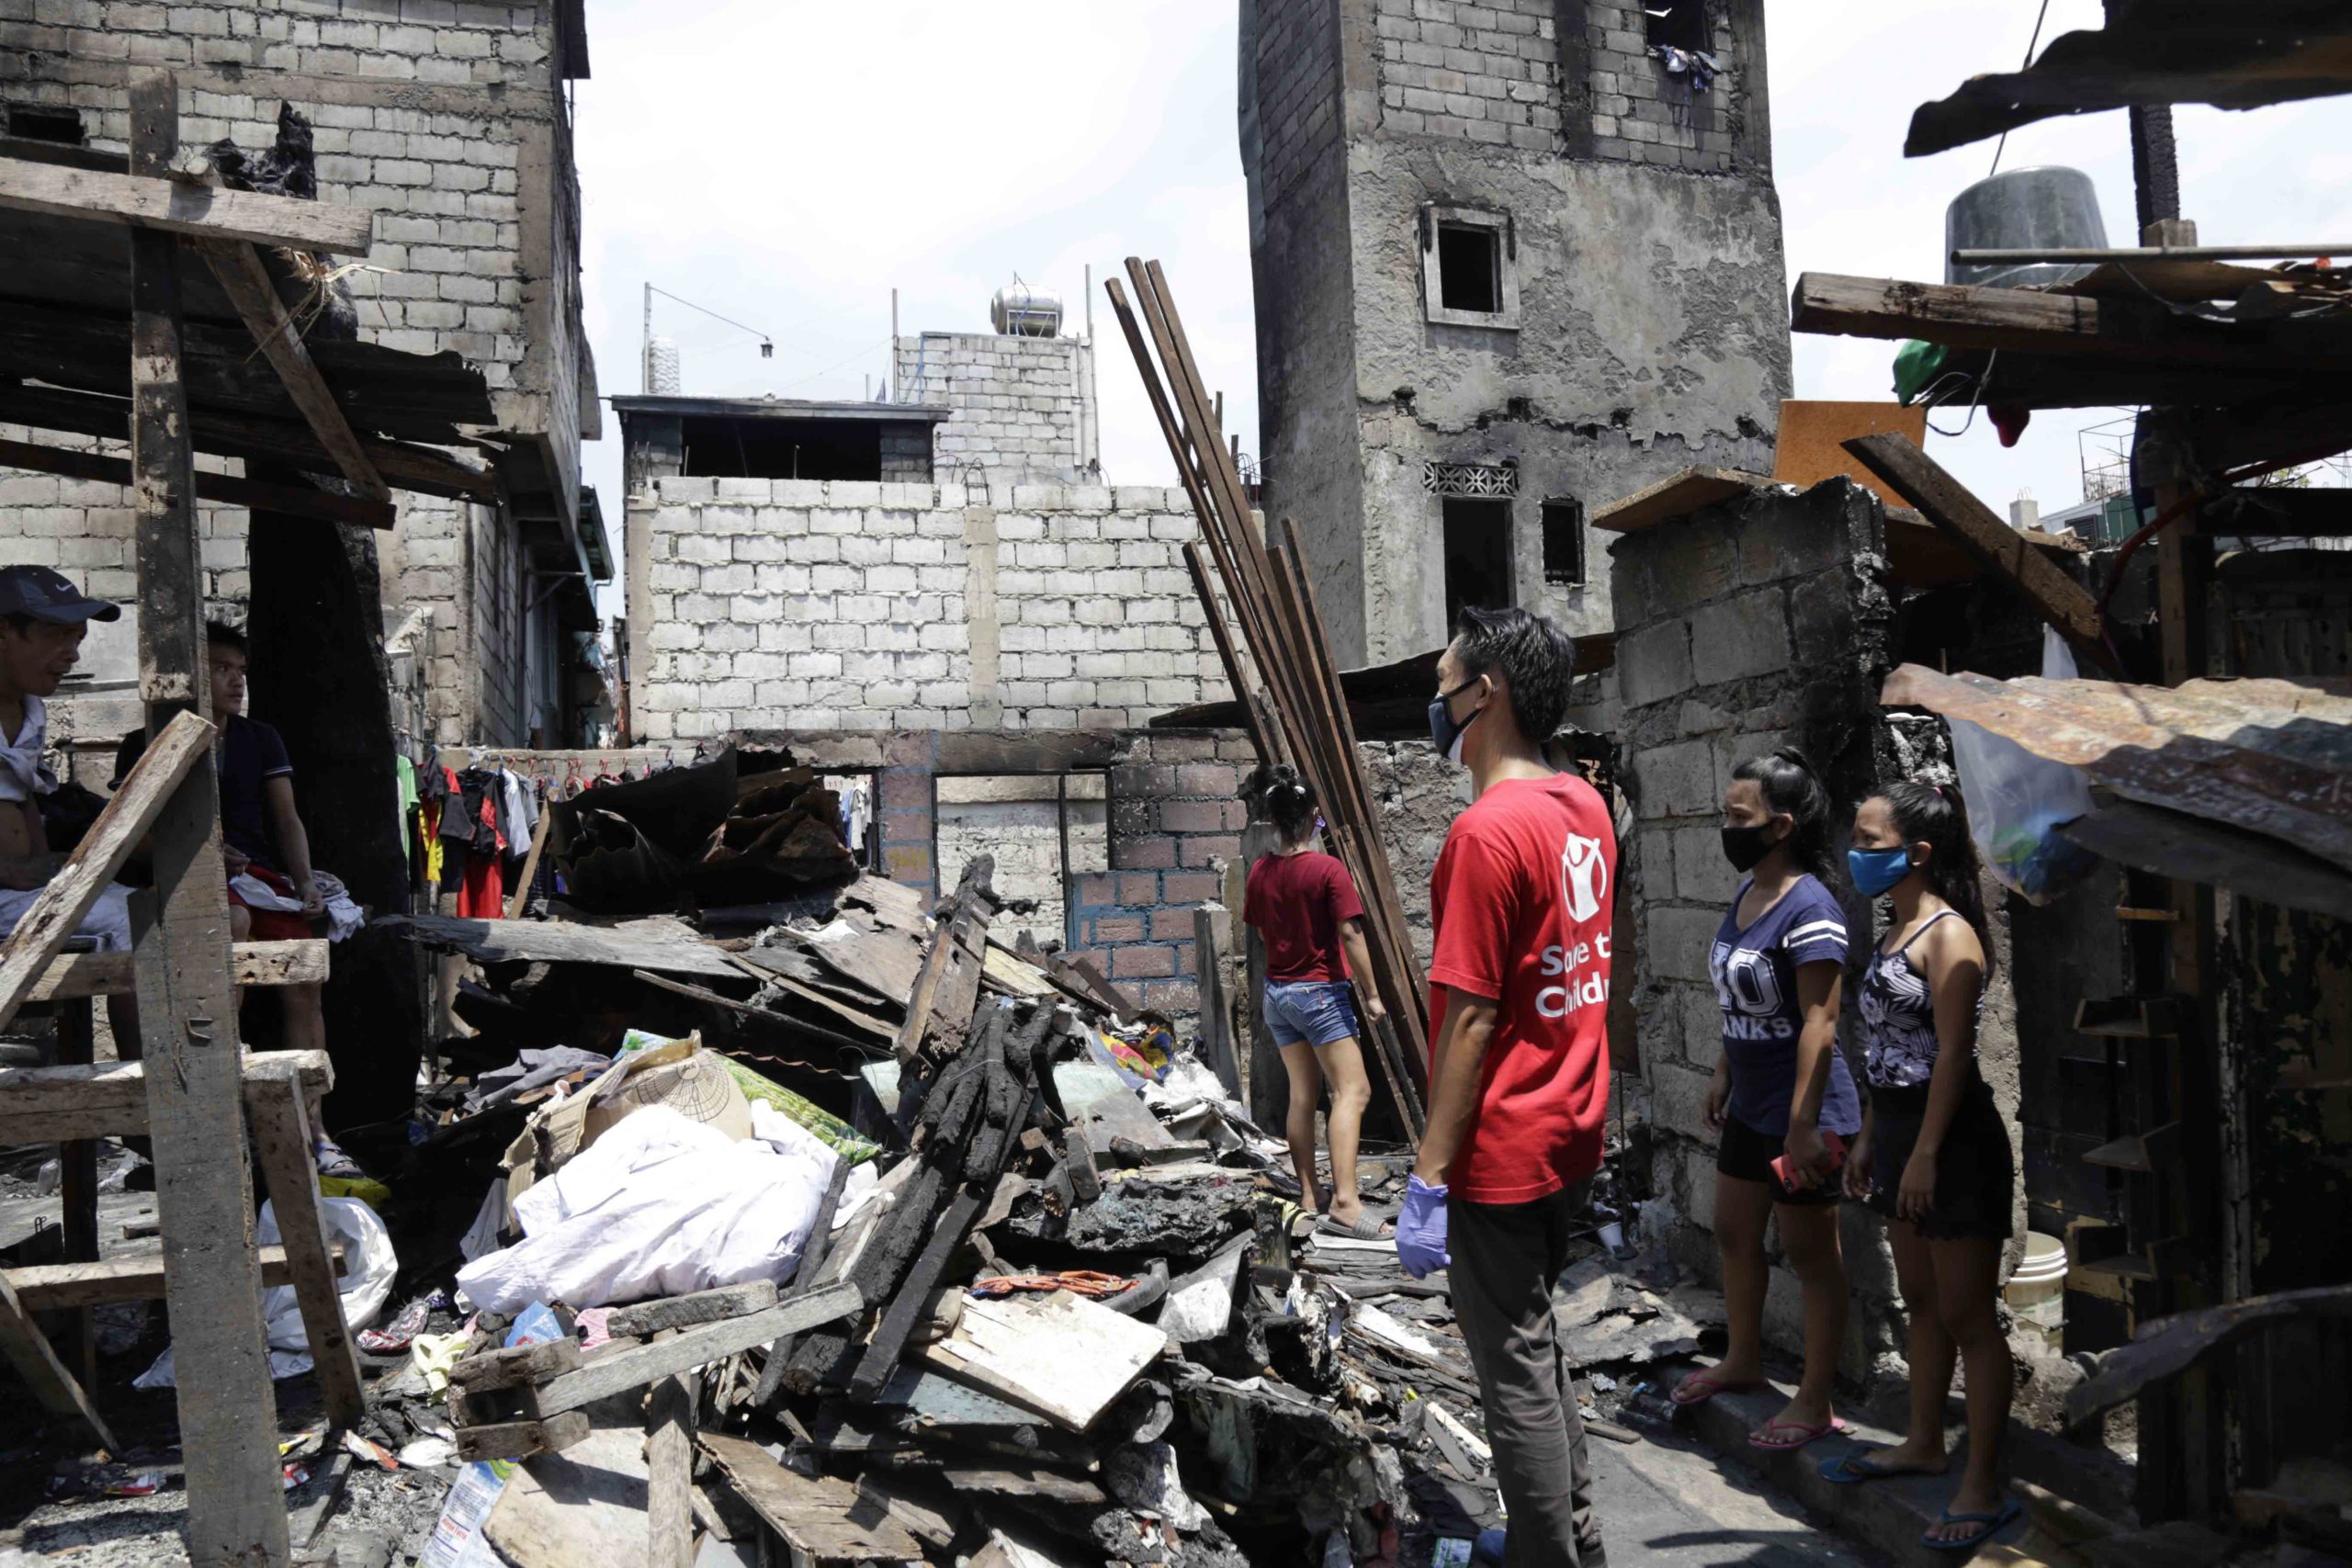 Save the Children staff inspecting homes damaged by a fire that occurred when Pasay City was under the enhanced community quarantine early this year. Photo by Save the Children